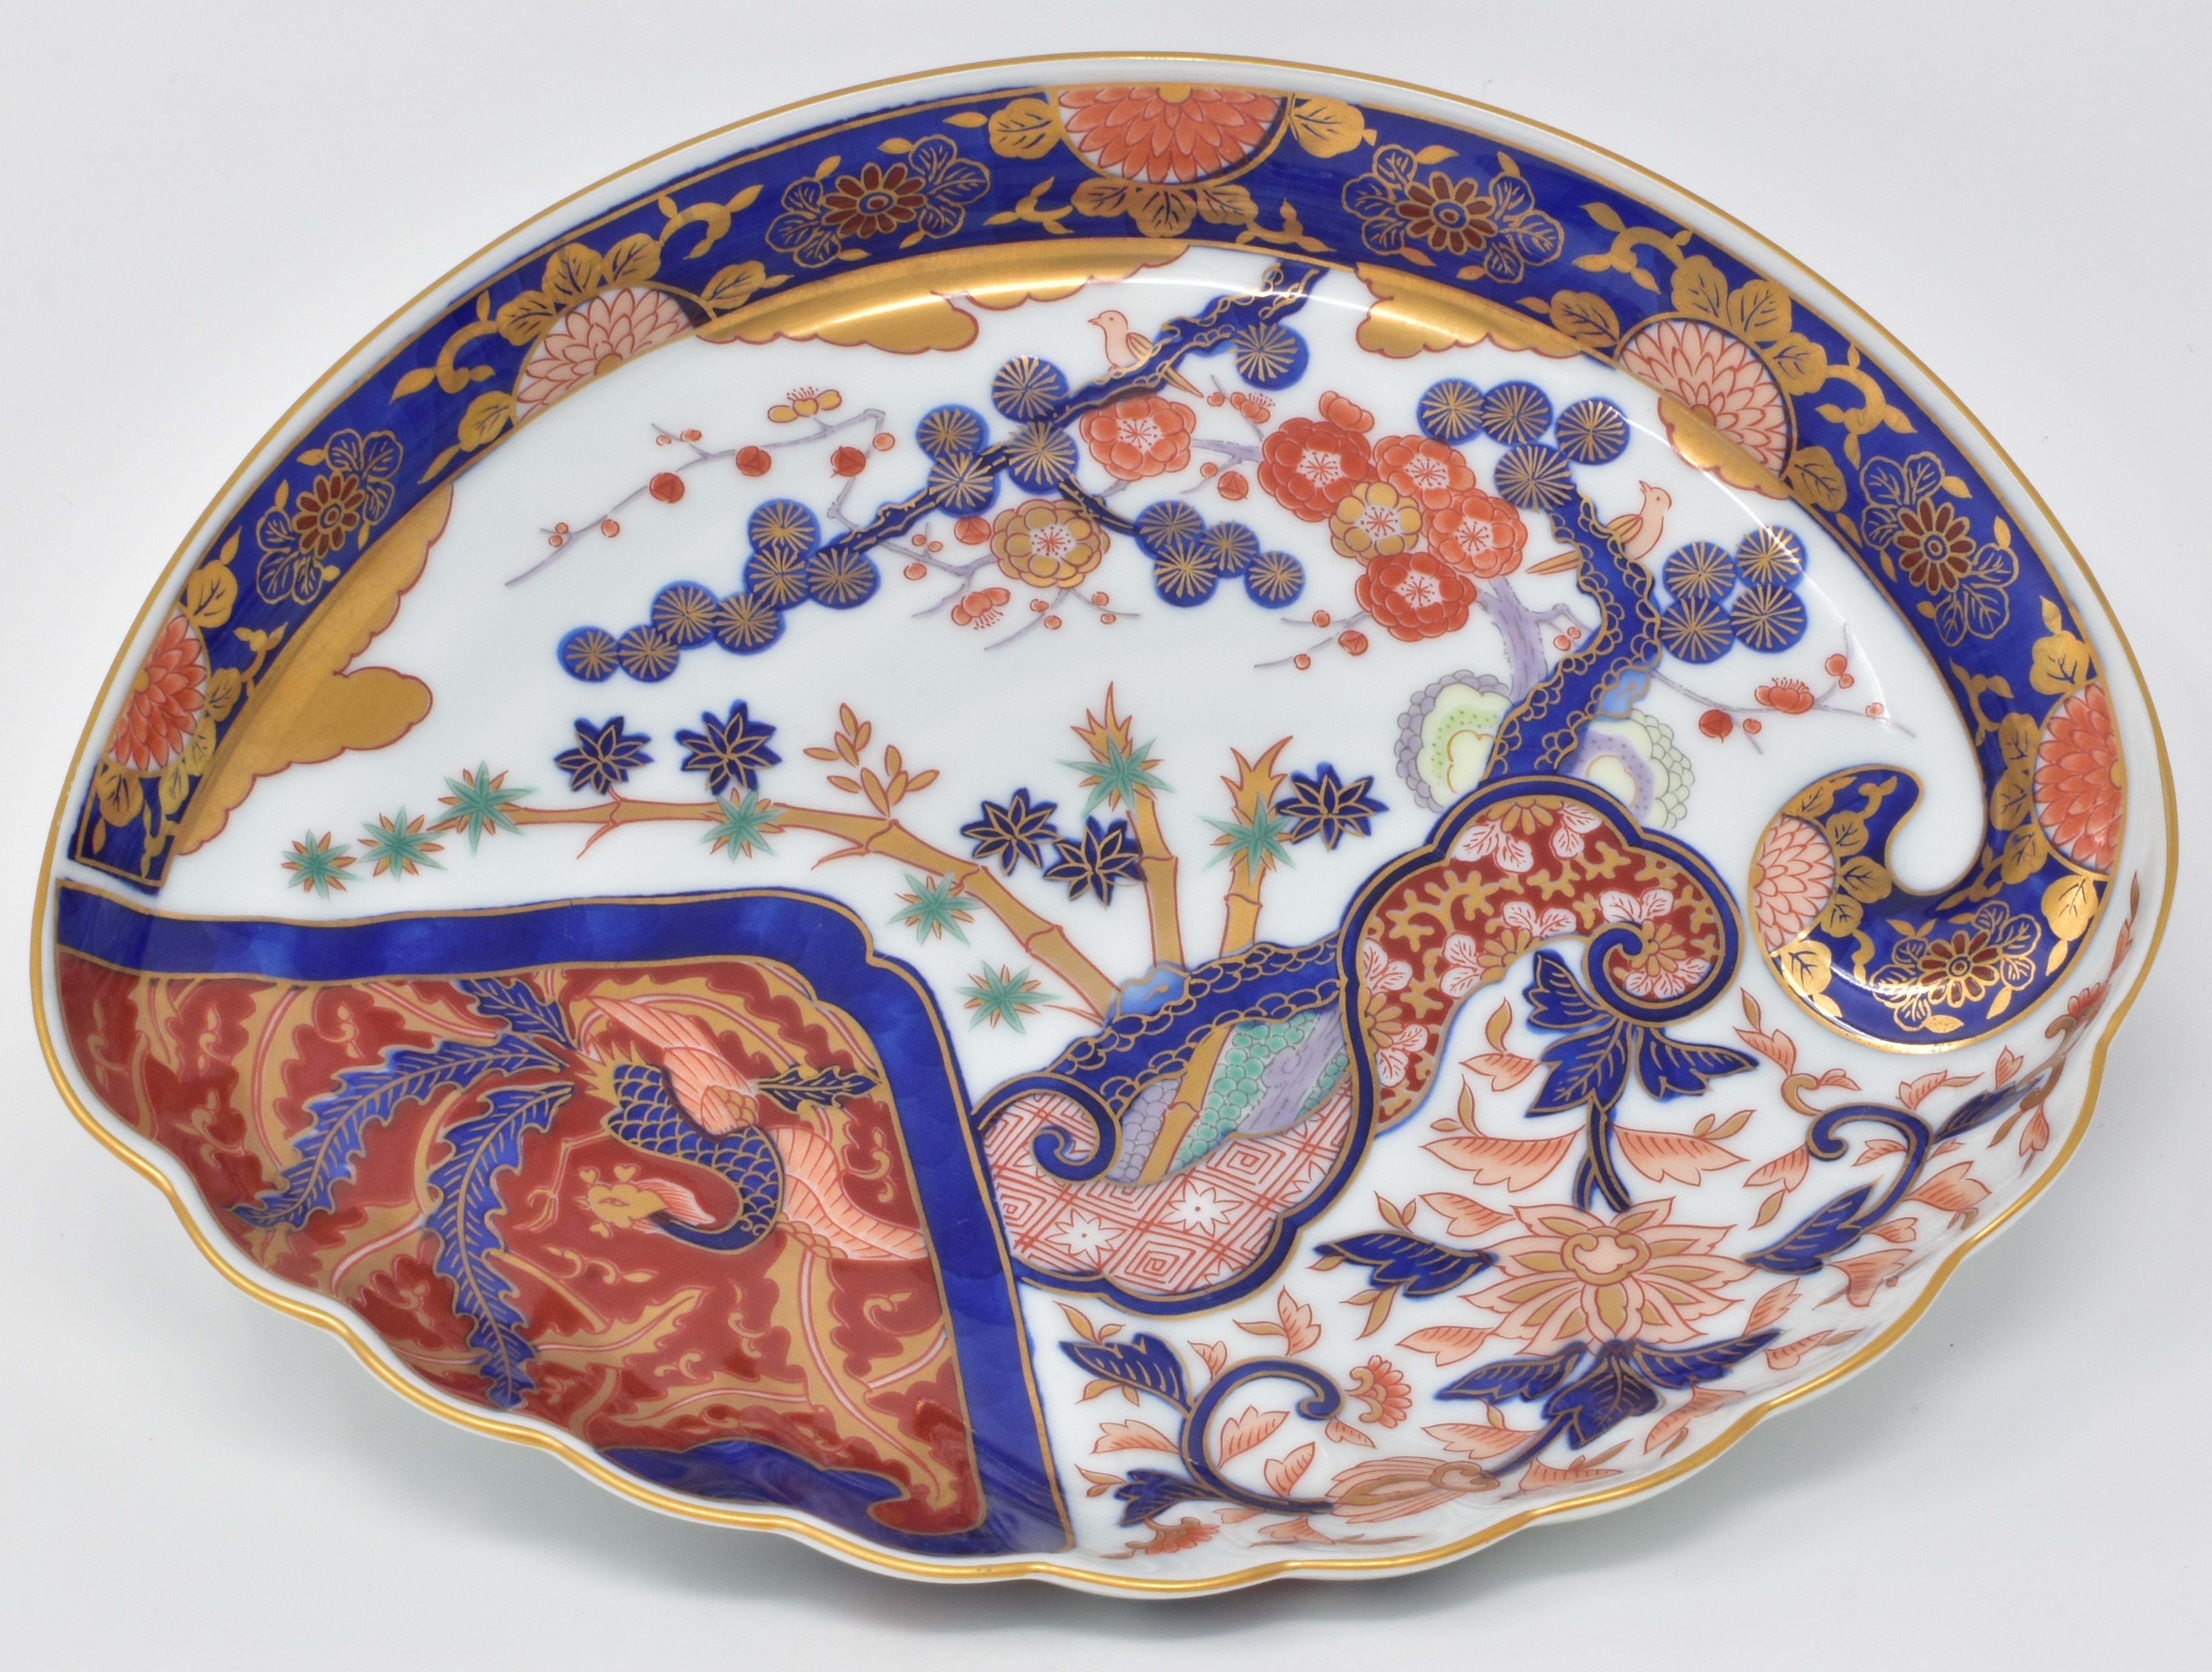 Contemporary Japanese Gilded Imari Blue Red Decorative Porcelain Charger 2